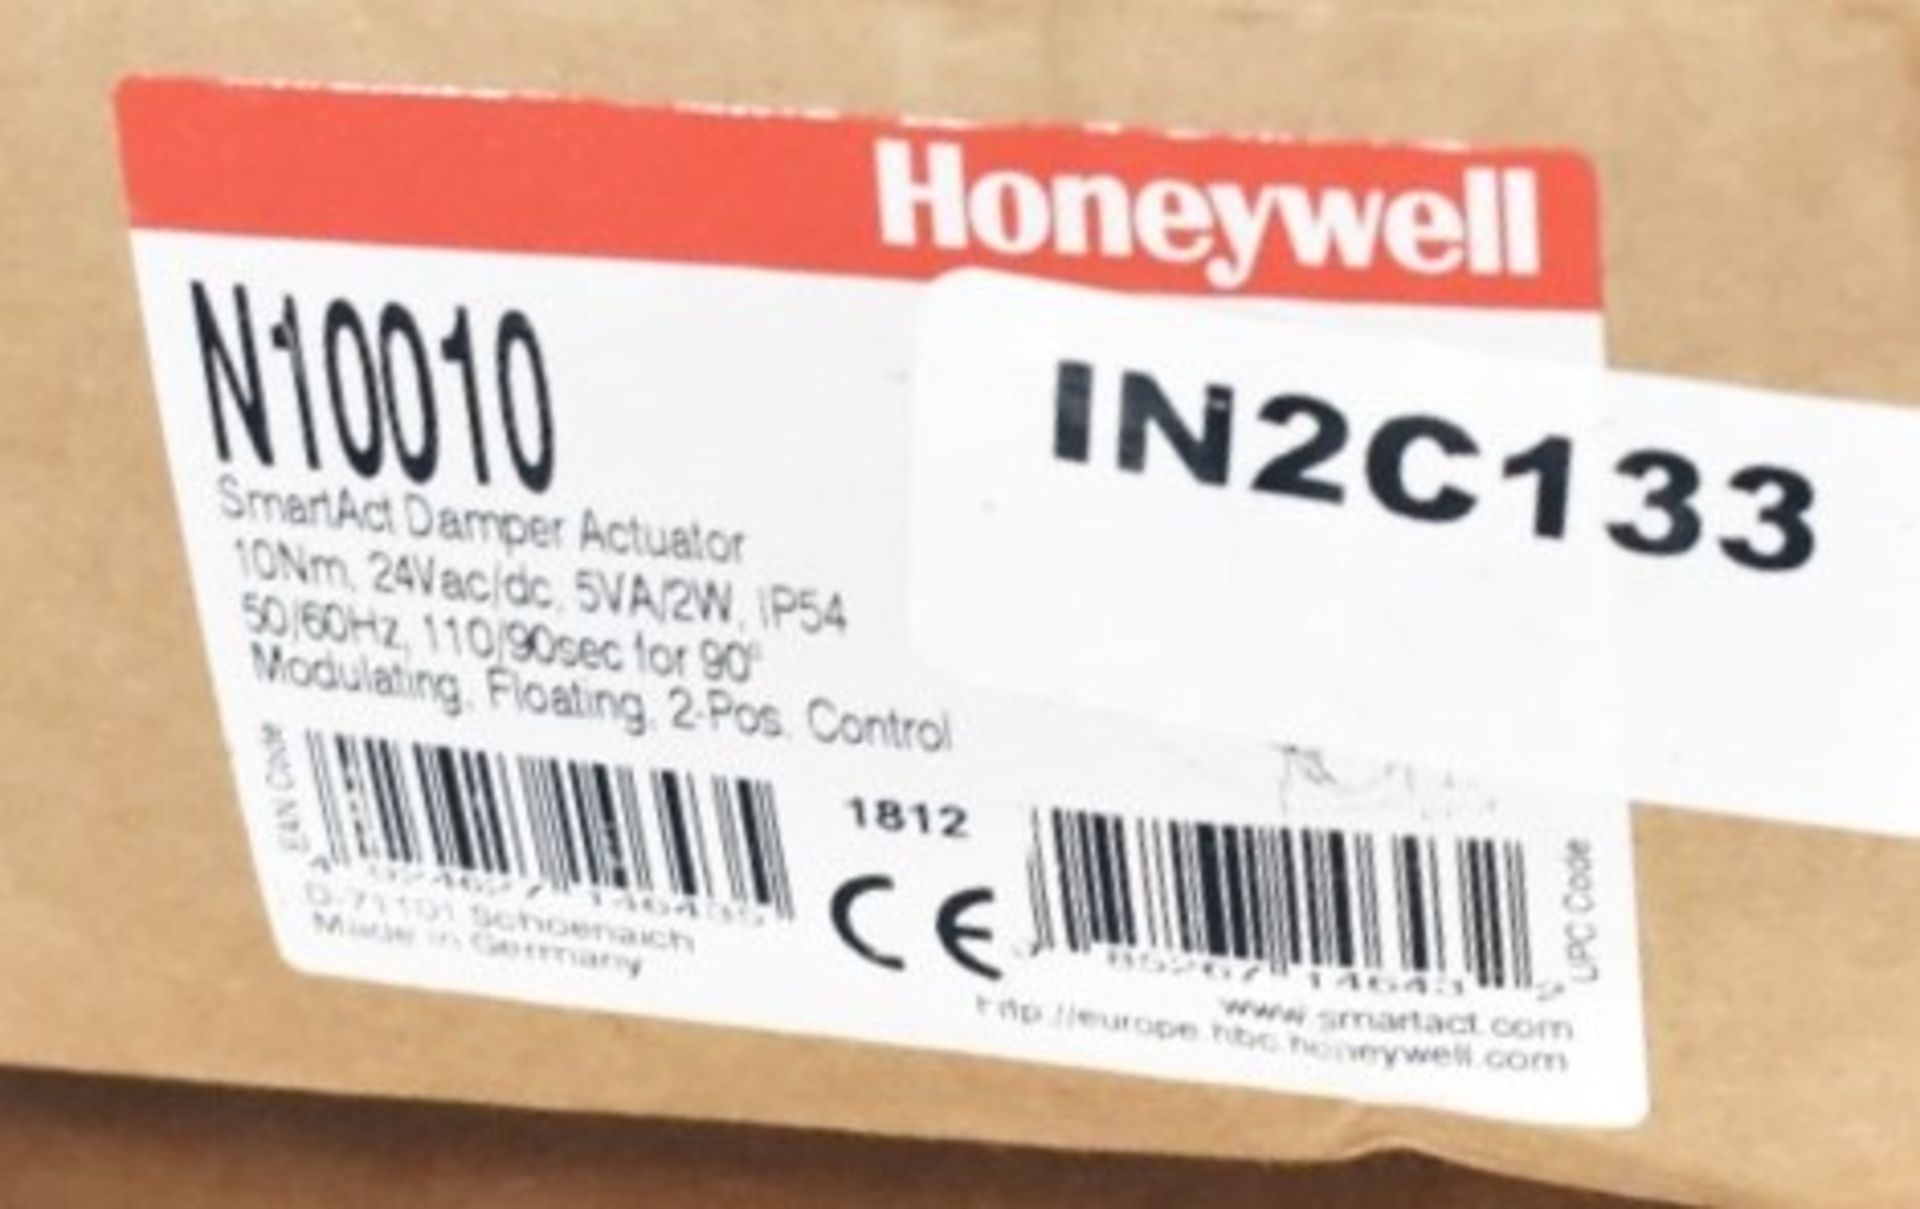 1 x Honeywell SmartAct Damper Actuator - Type NN10010 - New Boxed Stock - RRP £222 - Image 5 of 6